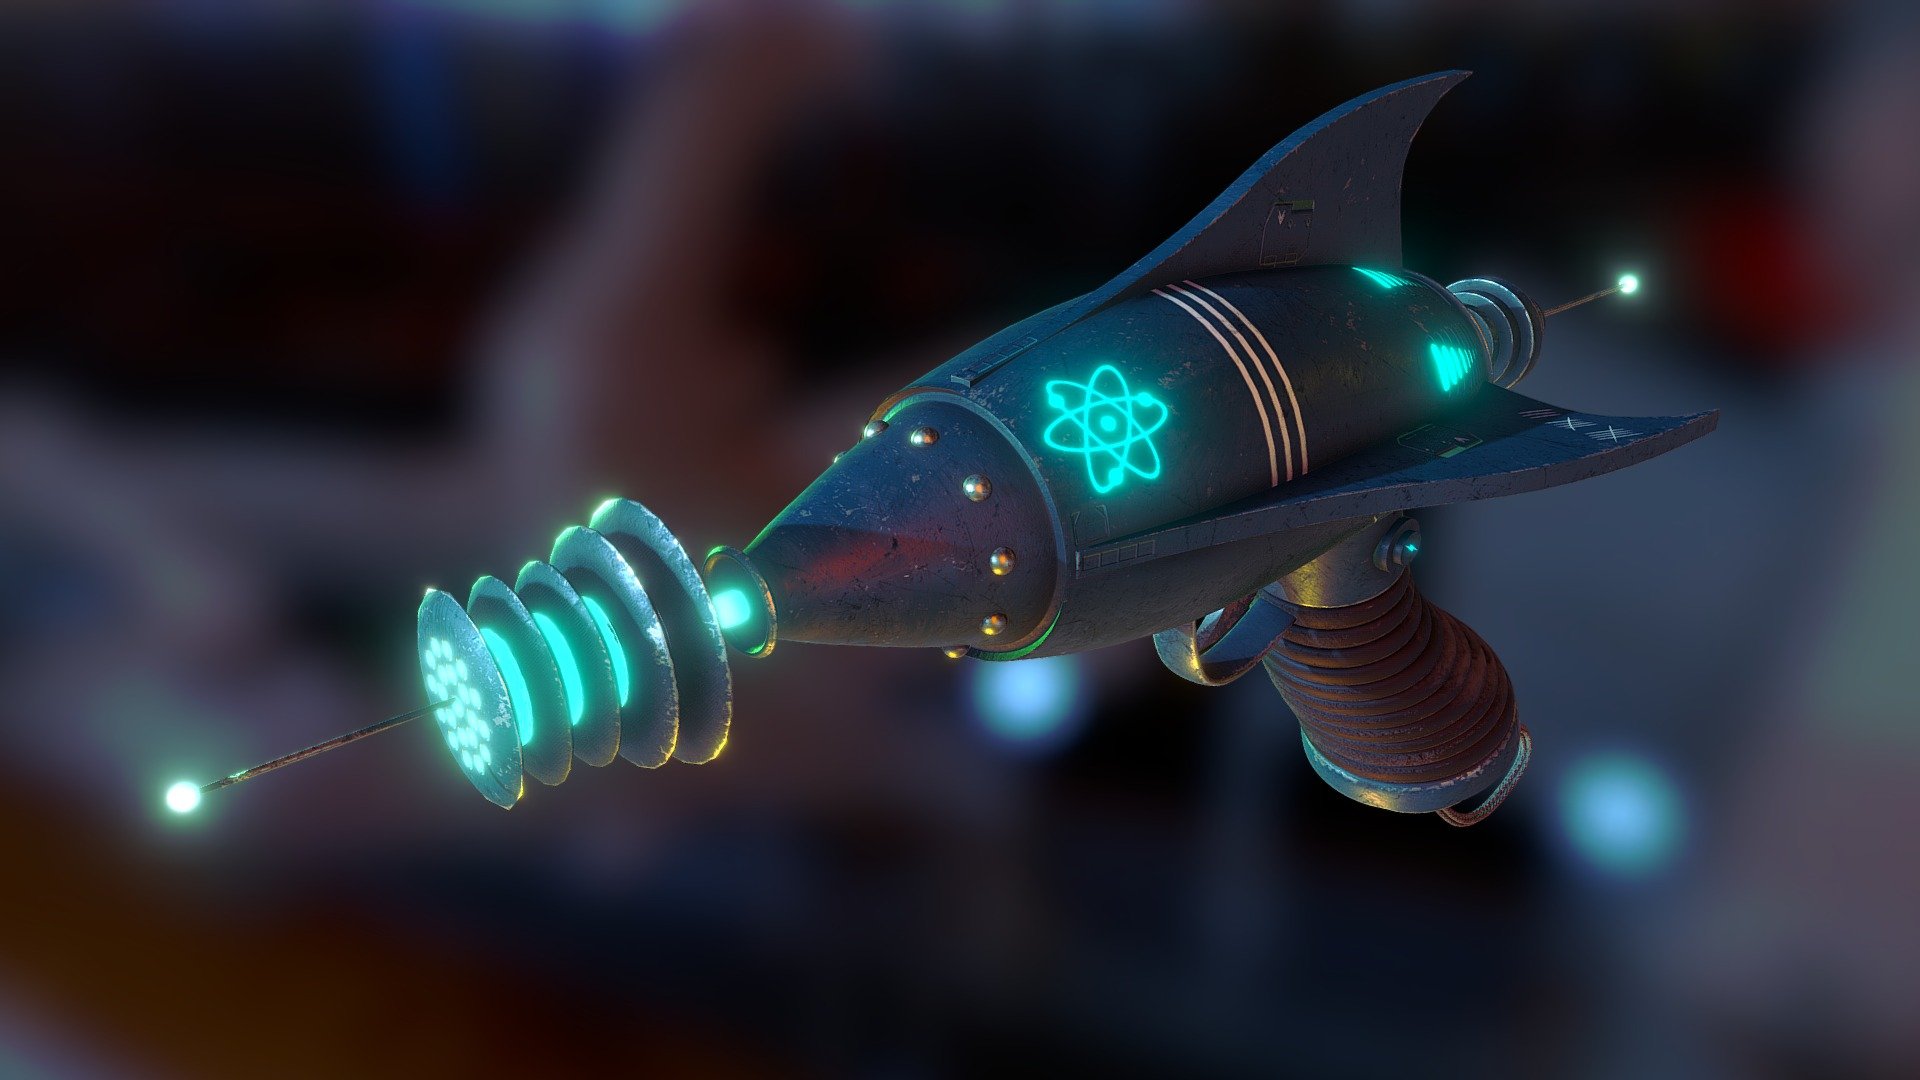 Ray Gun for Assignment - Pew pew